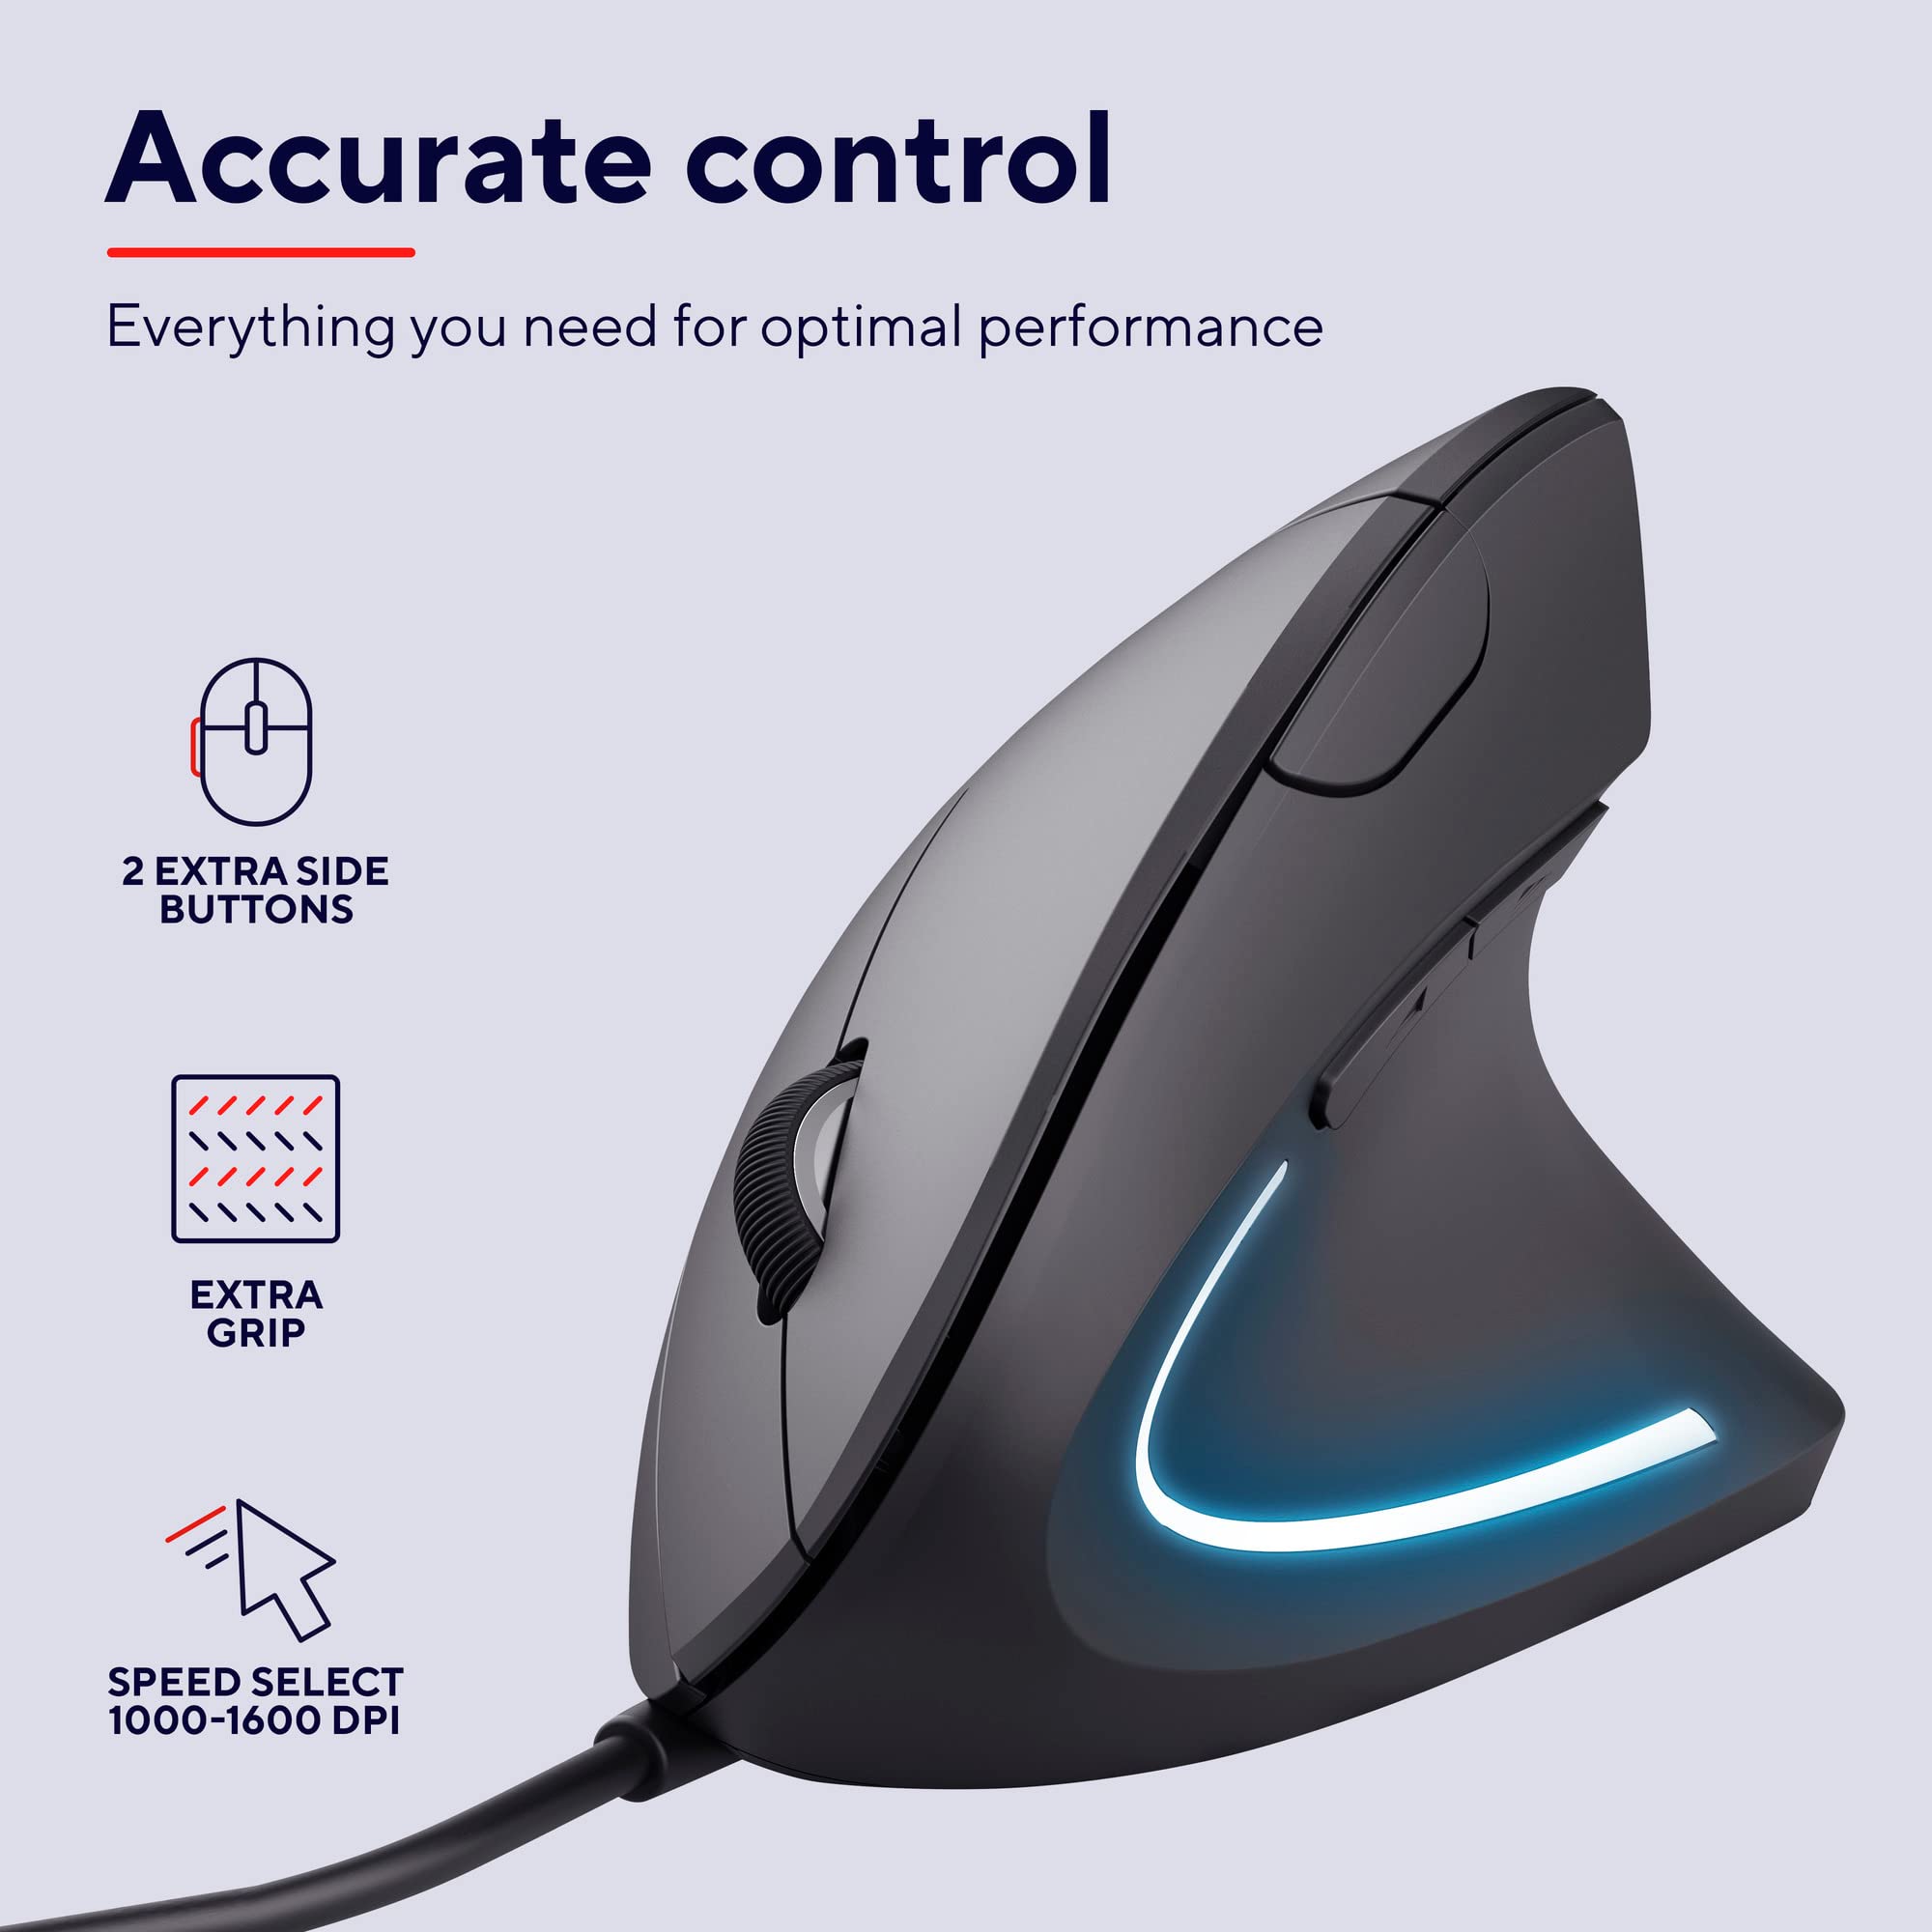 Trust Verto Wired Ergonomic Mouse, Vertical Mouse with LED Illumination, 1000-1600 DPI, 6 Buttons, for Right Hand Users, Computer Mouse for PC and Laptop - Black